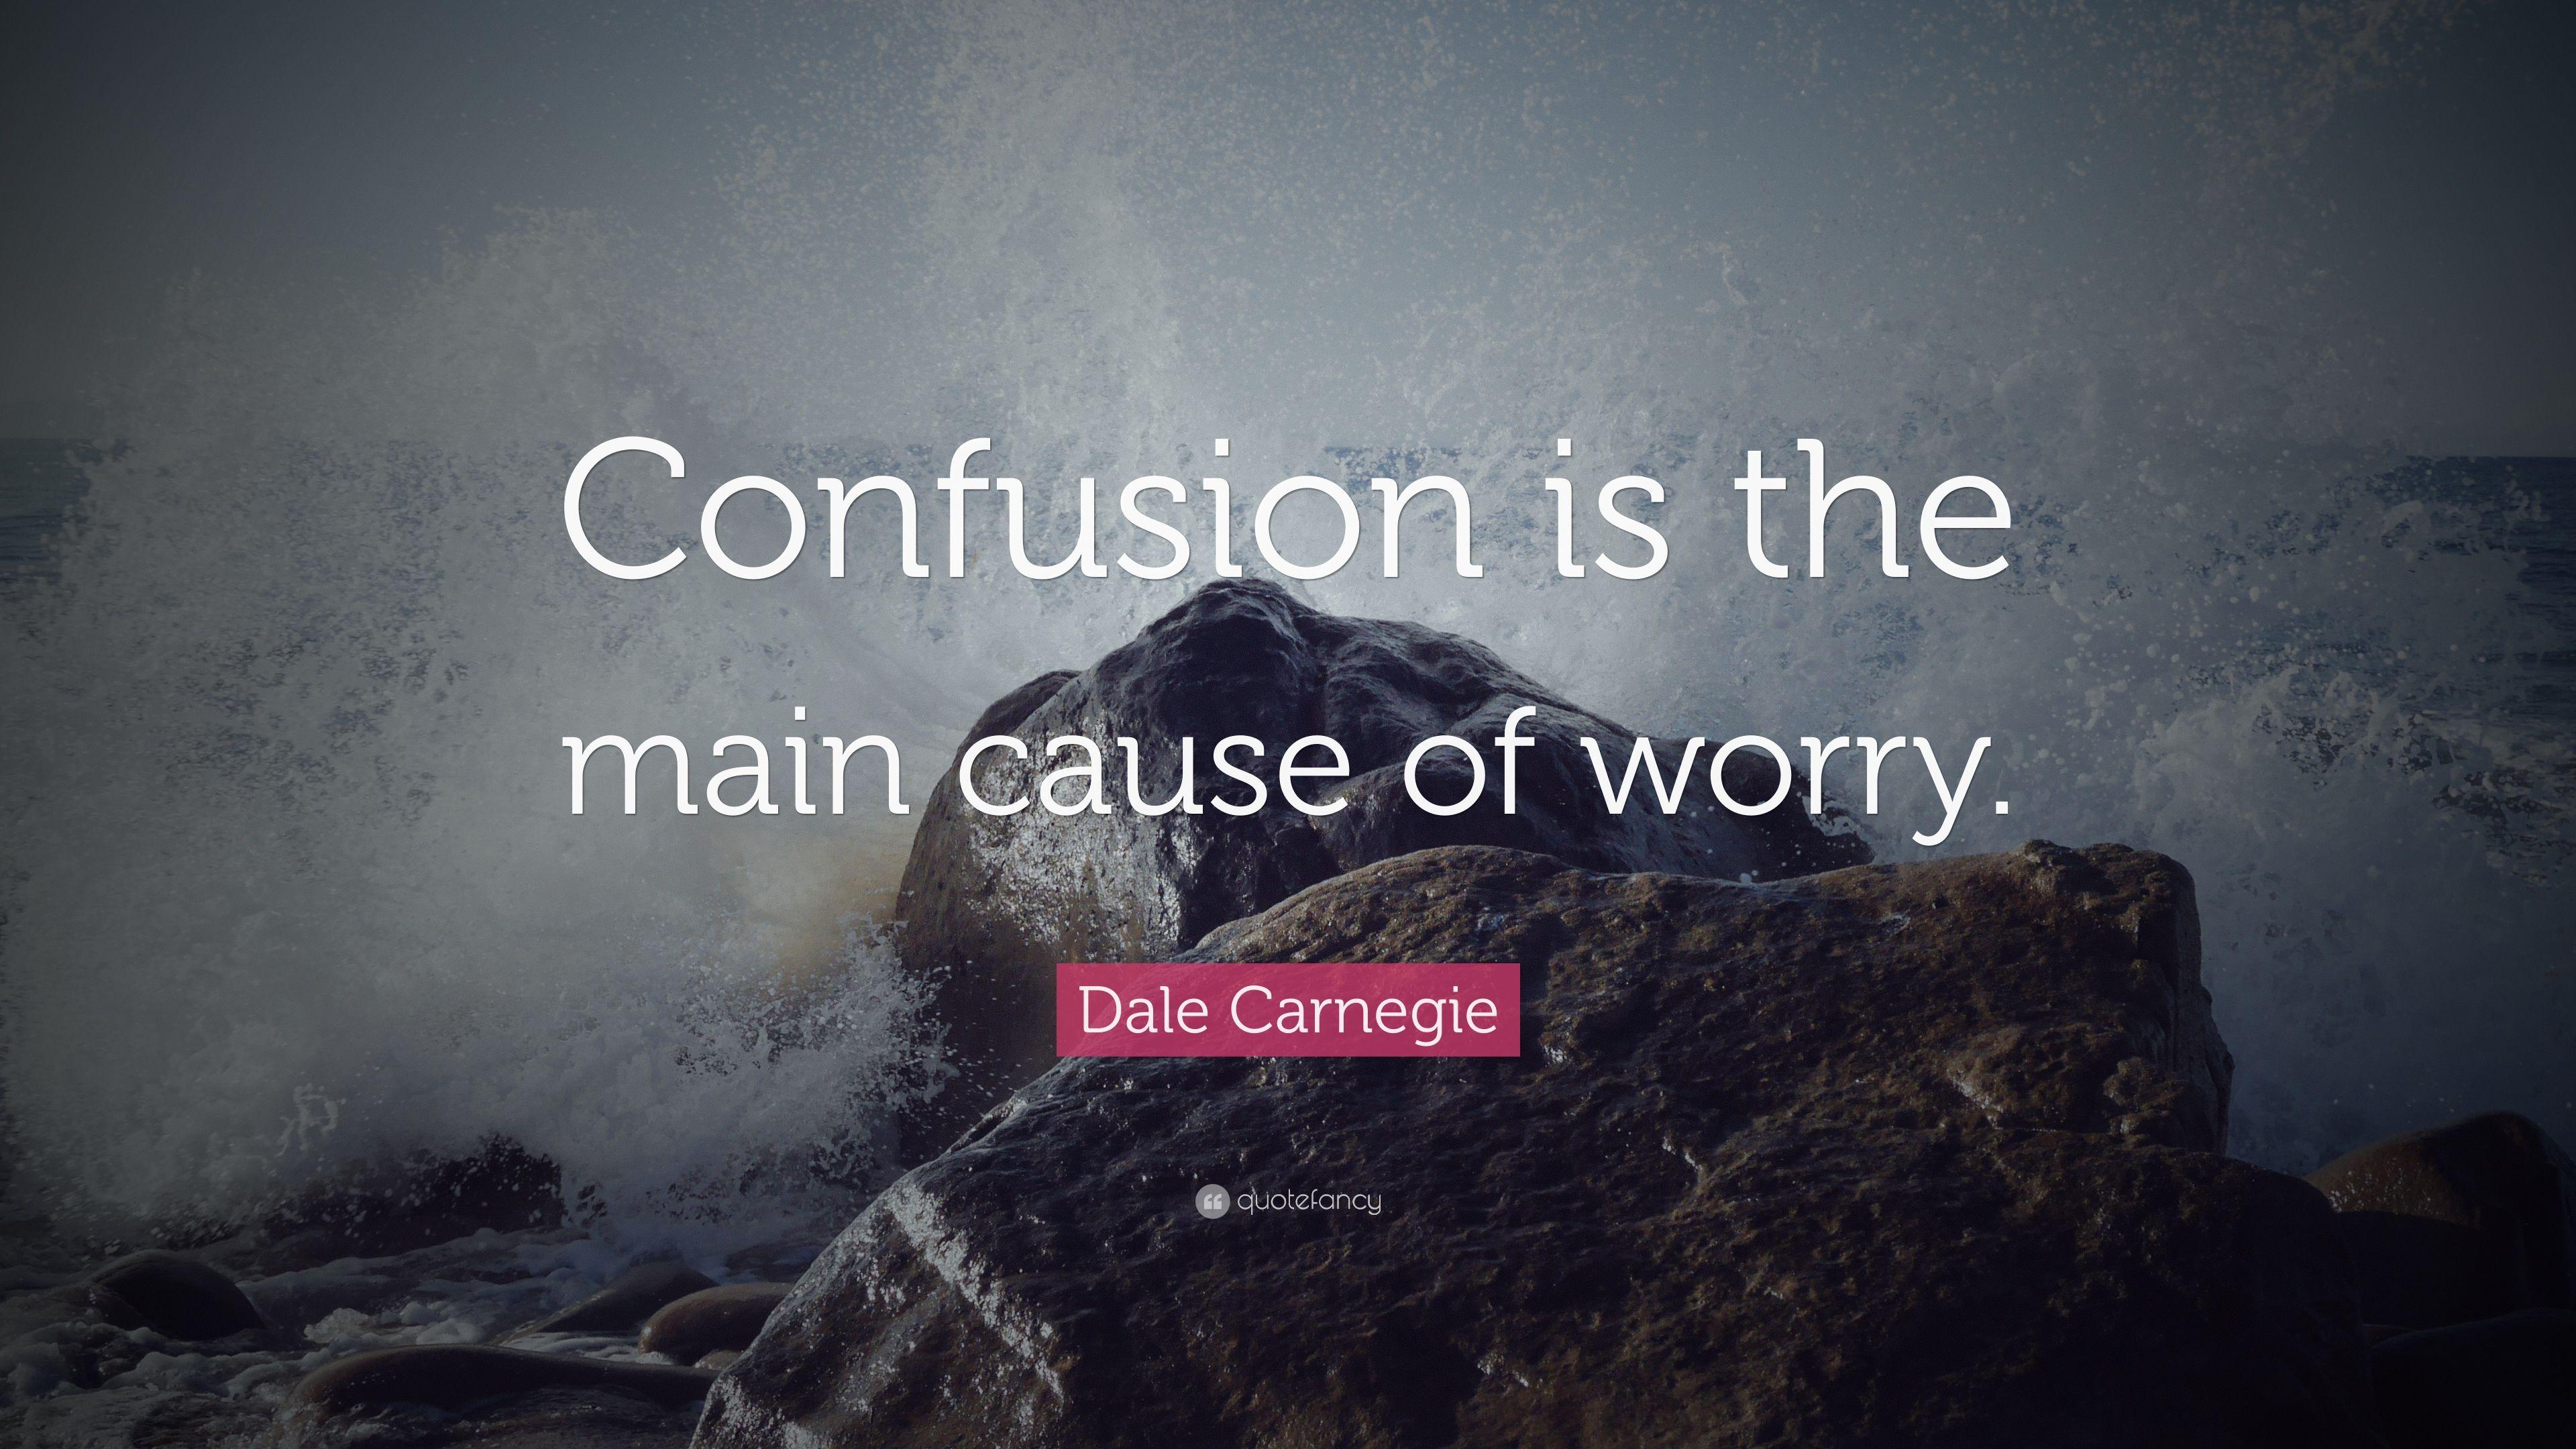 Dale Carnegie Quote: “Confusion is the main cause of worry.” 12